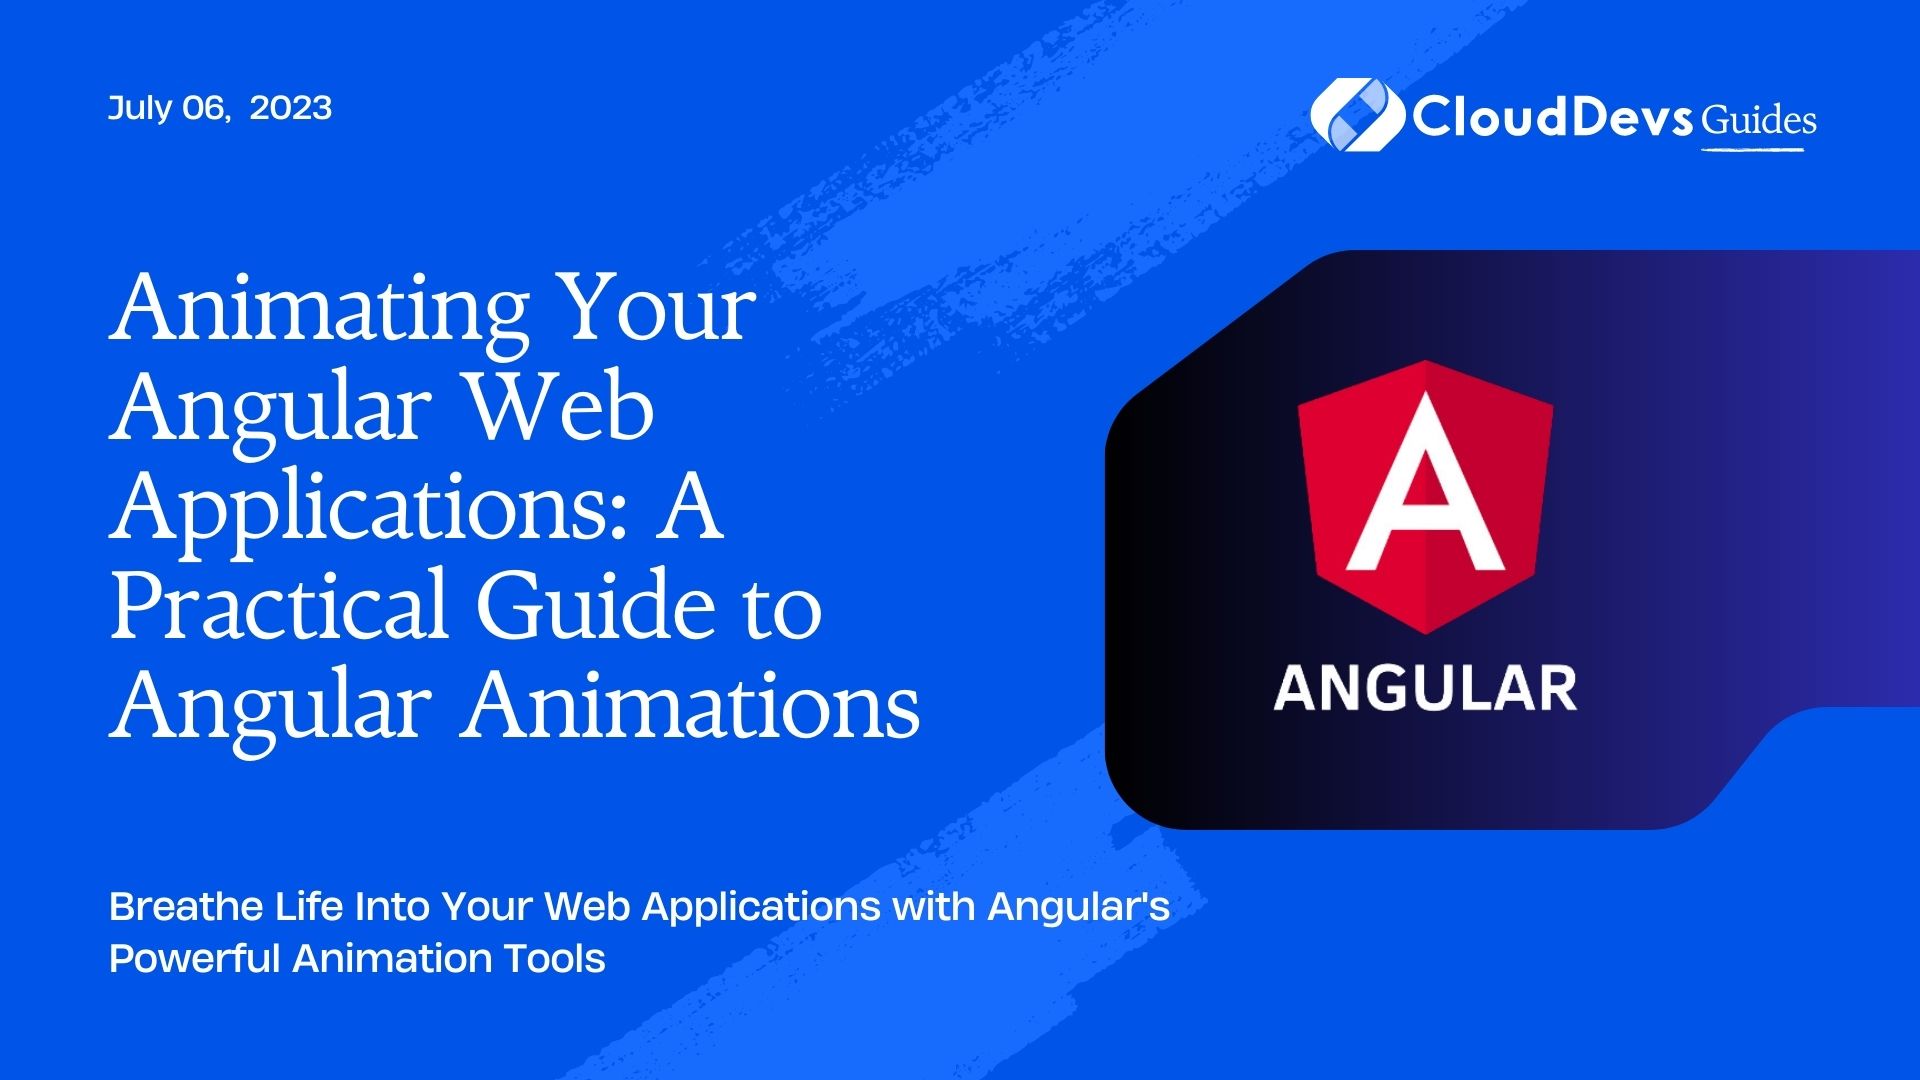 Animating Your Angular Web Applications: A Practical Guide to Angular Animations